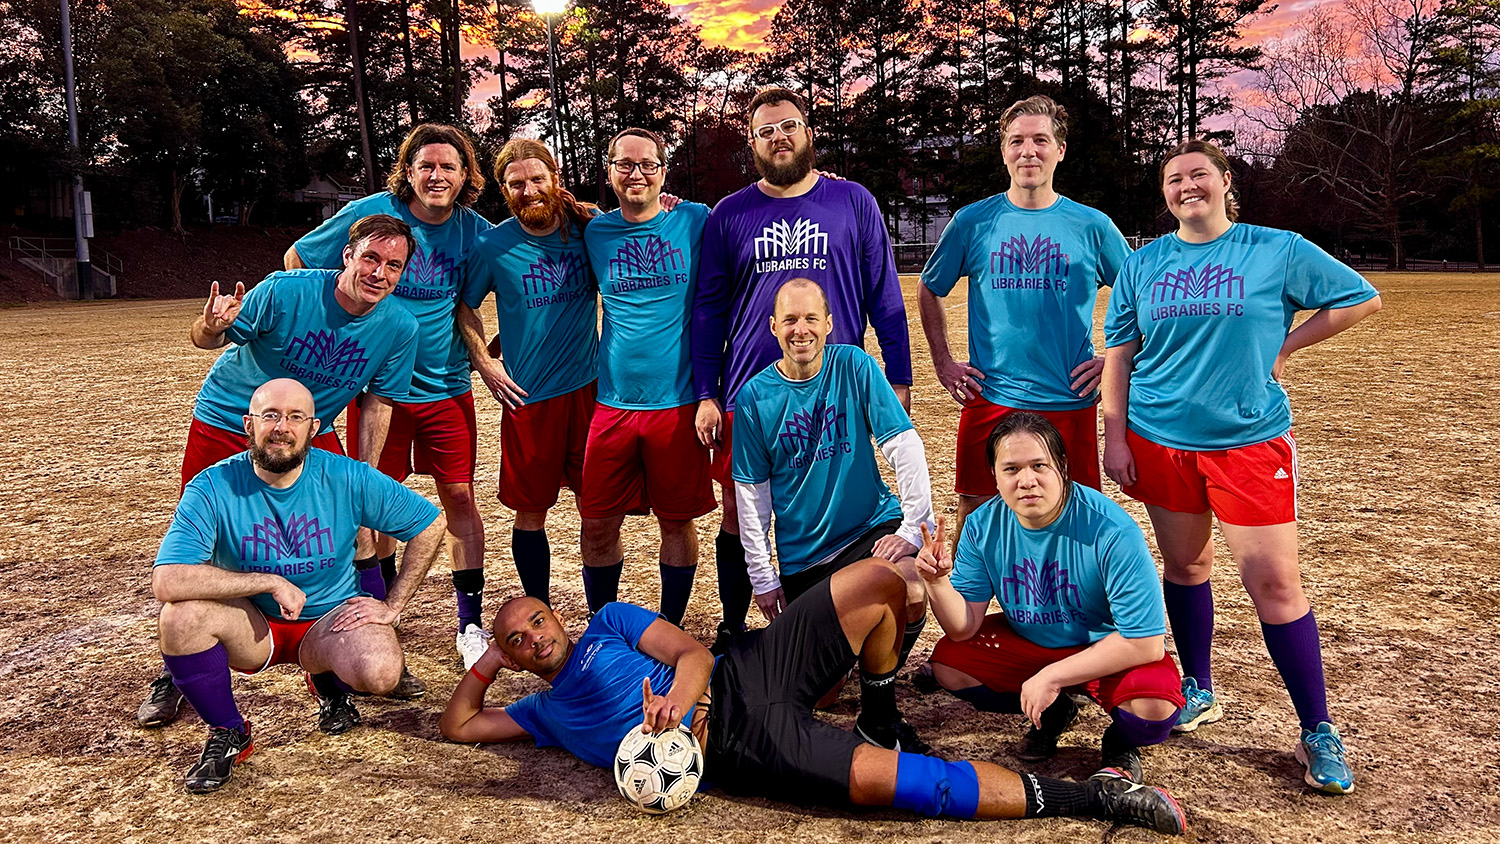 A soccer team made up of NC State staff members.